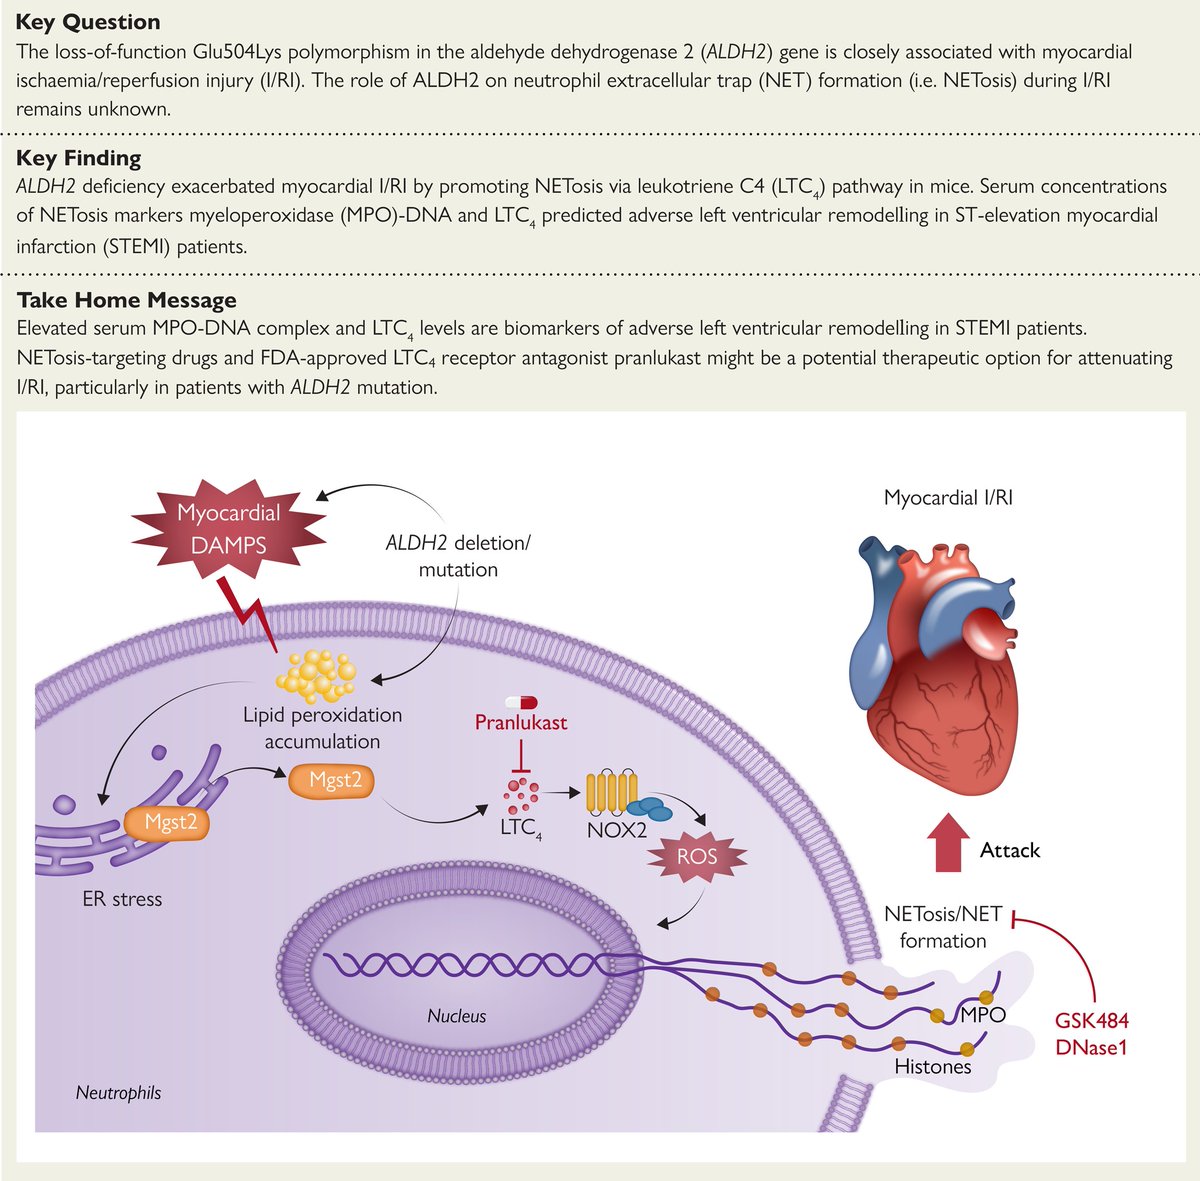 Pharmacotherapeutic options for ischaemia/reperfusion injury: the role of aldehyde dehydrogenase 2 gene! academic.oup.com/eurheartj/adva… #neutrophil #extracellular #traps #leukotriene #inhibition #myocardium #ischaemia #reperfusion #EHJ #cardiotwitter @ESC_Journals @escardio